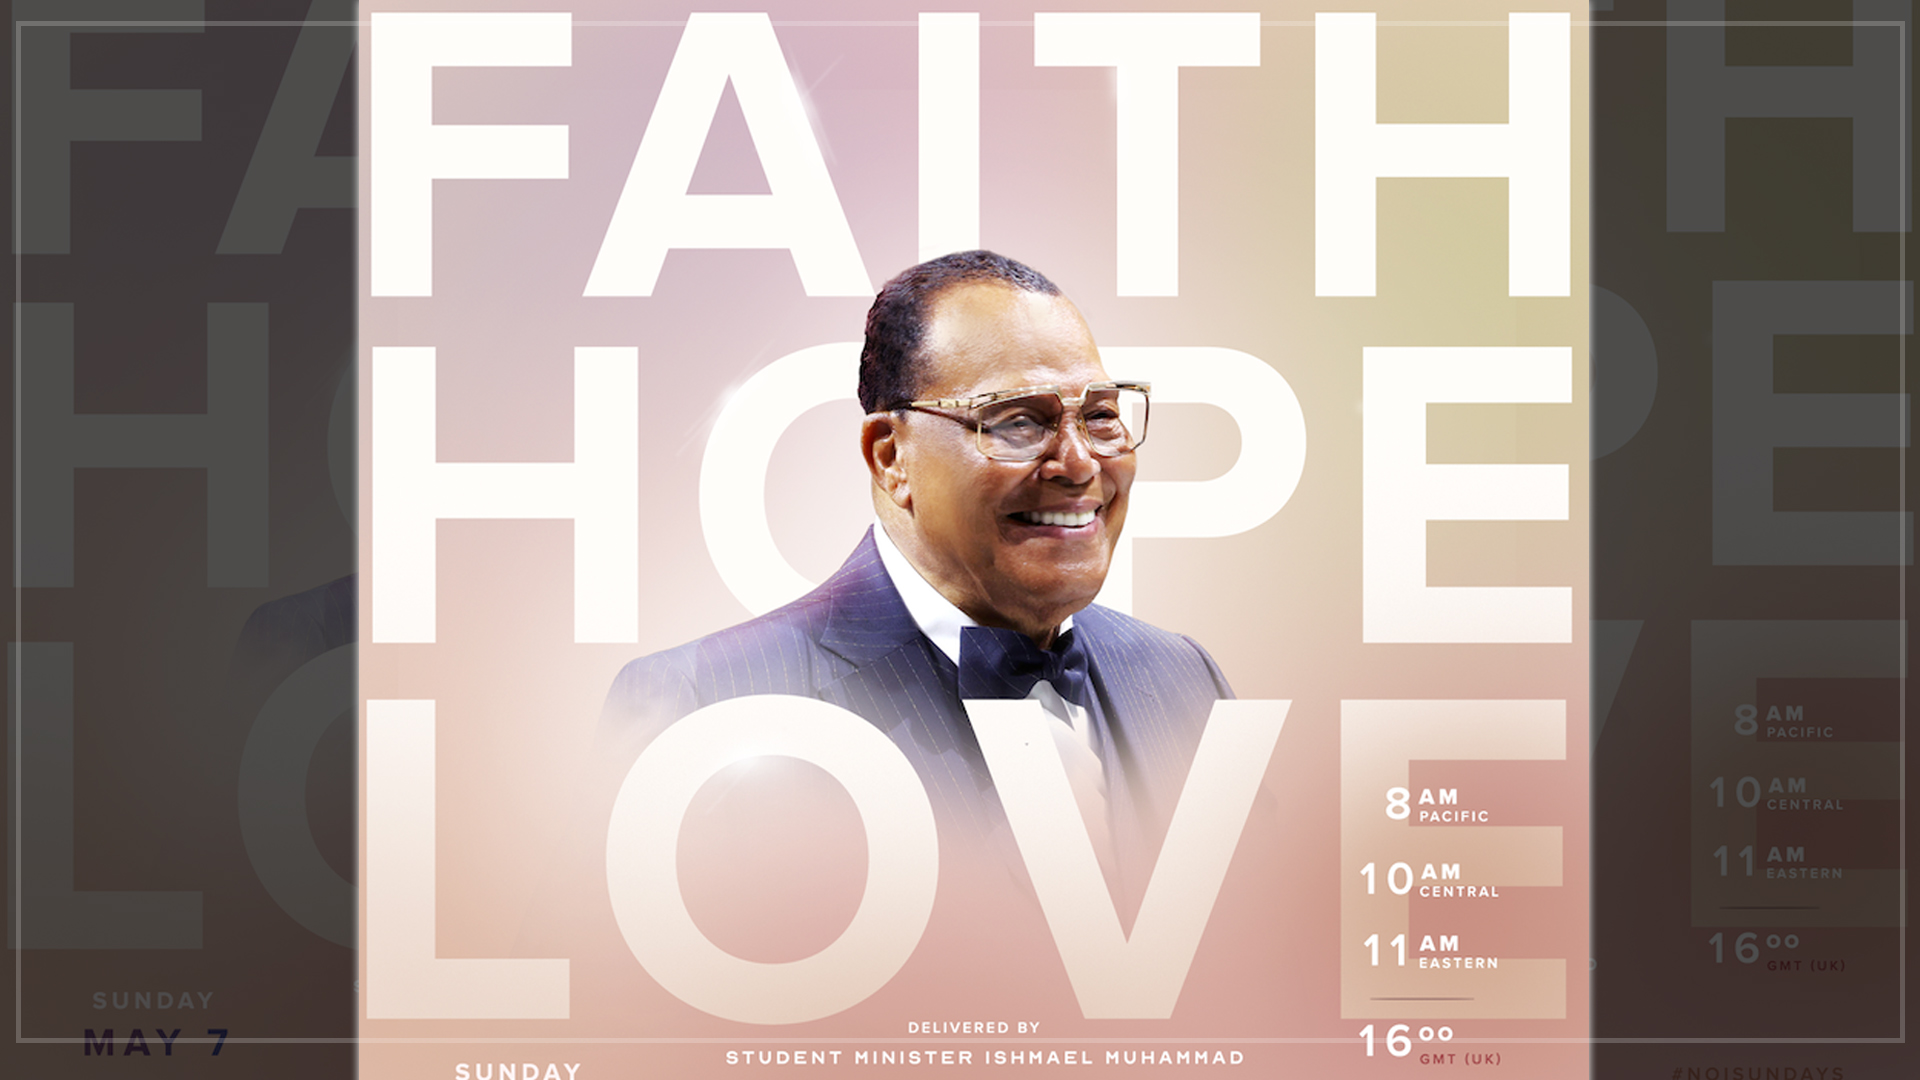 Student Minister Ishmael Muhammad speaks on the Love and Faith of Minister Farrakhan